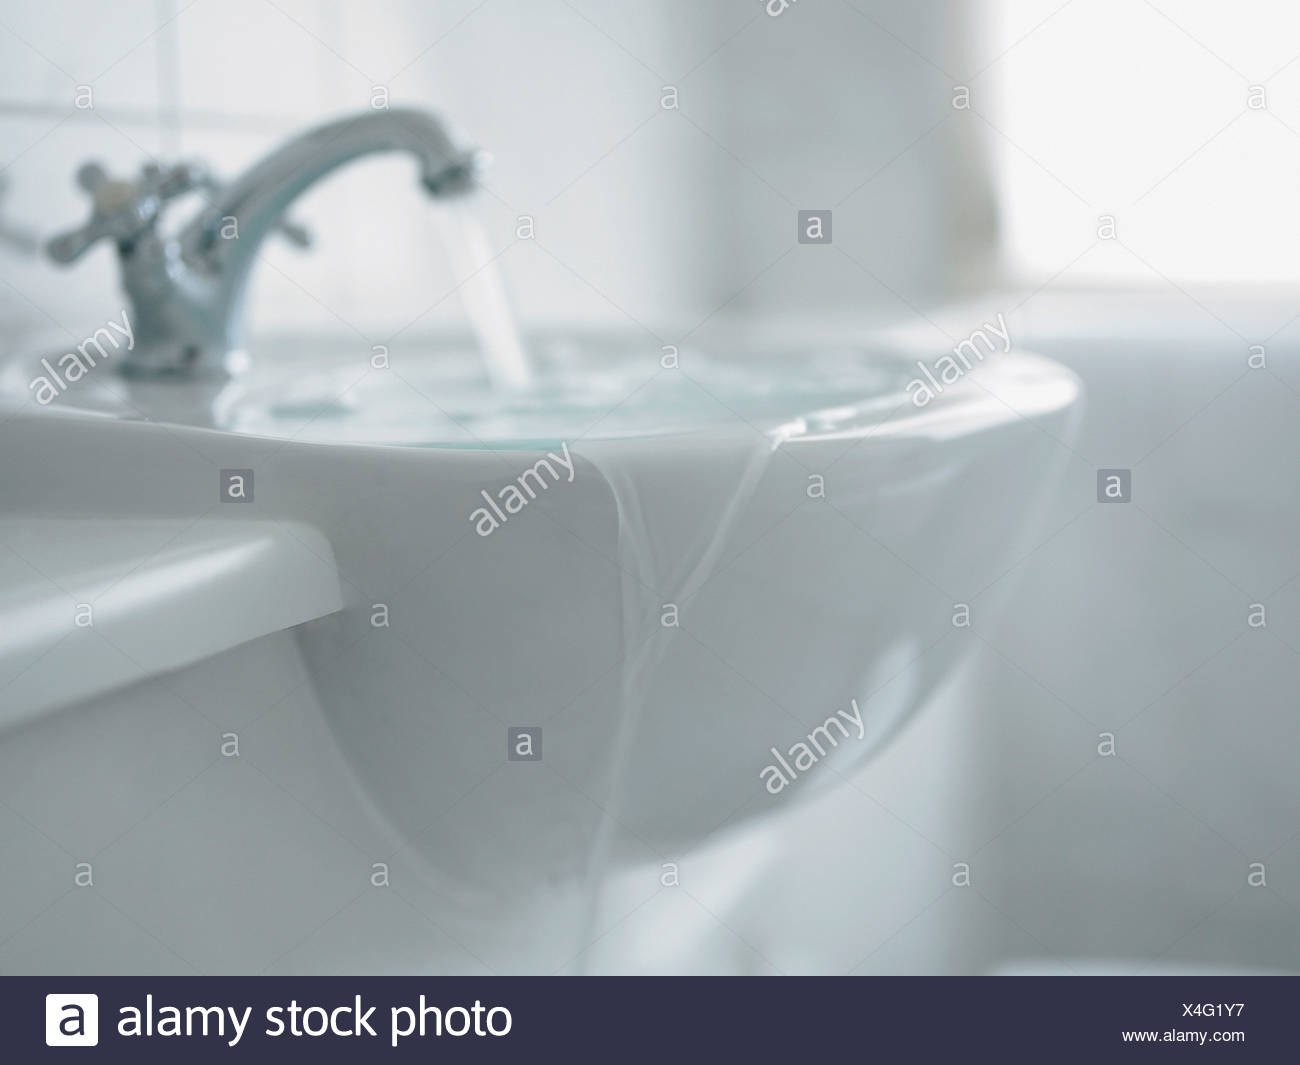 Close Up Of Overflowing Bathroom Sink Stock Photo 278177291